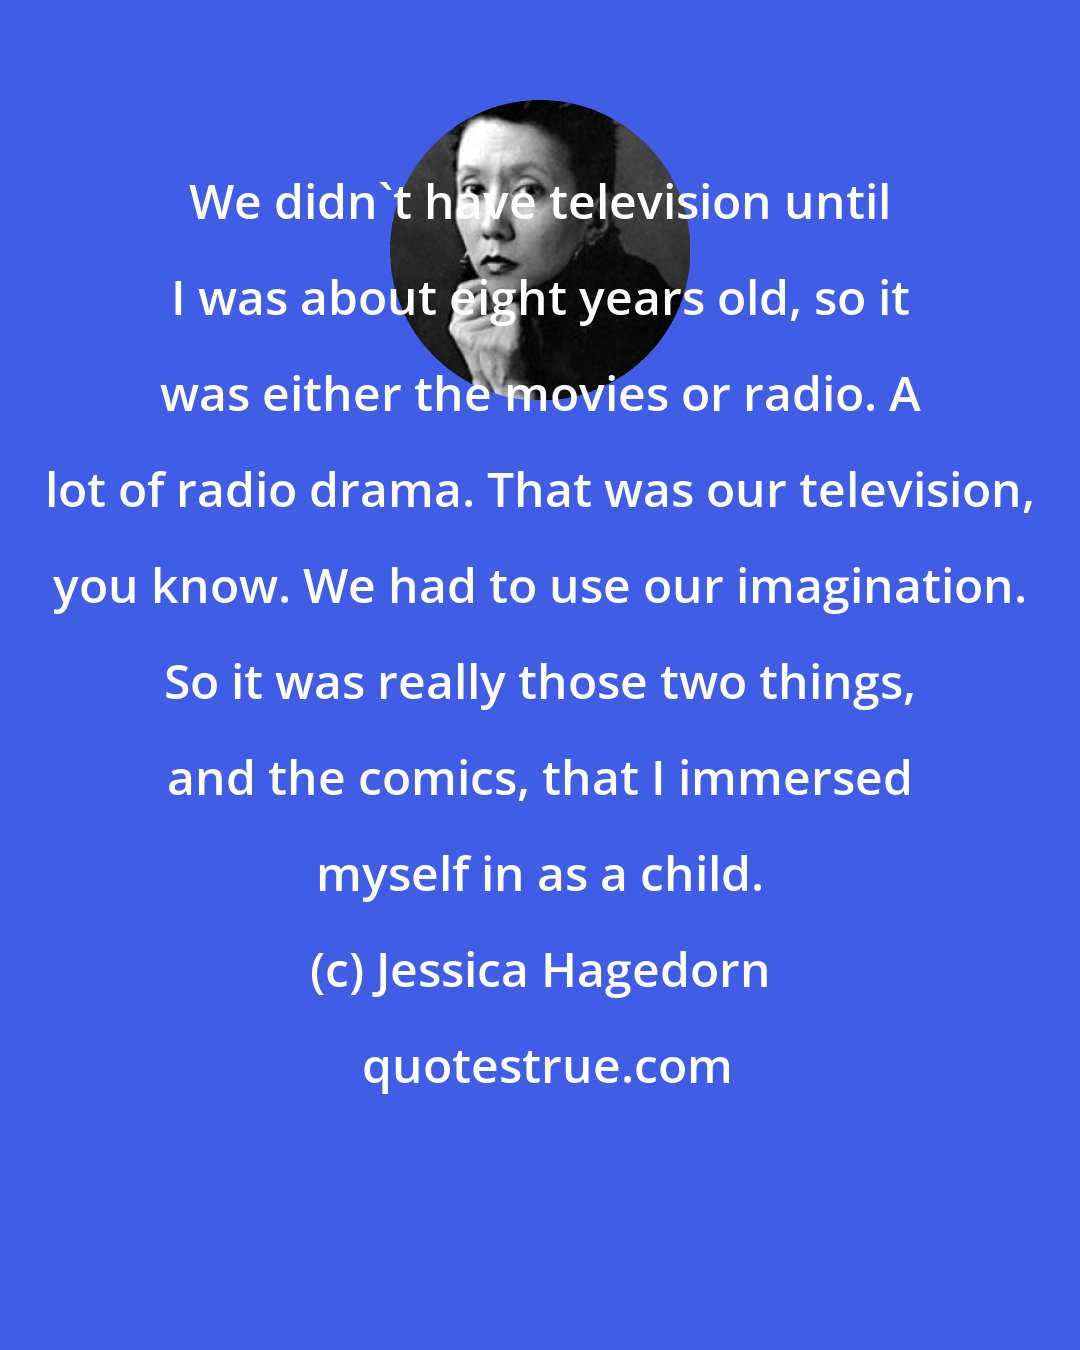 Jessica Hagedorn: We didn't have television until I was about eight years old, so it was either the movies or radio. A lot of radio drama. That was our television, you know. We had to use our imagination. So it was really those two things, and the comics, that I immersed myself in as a child.